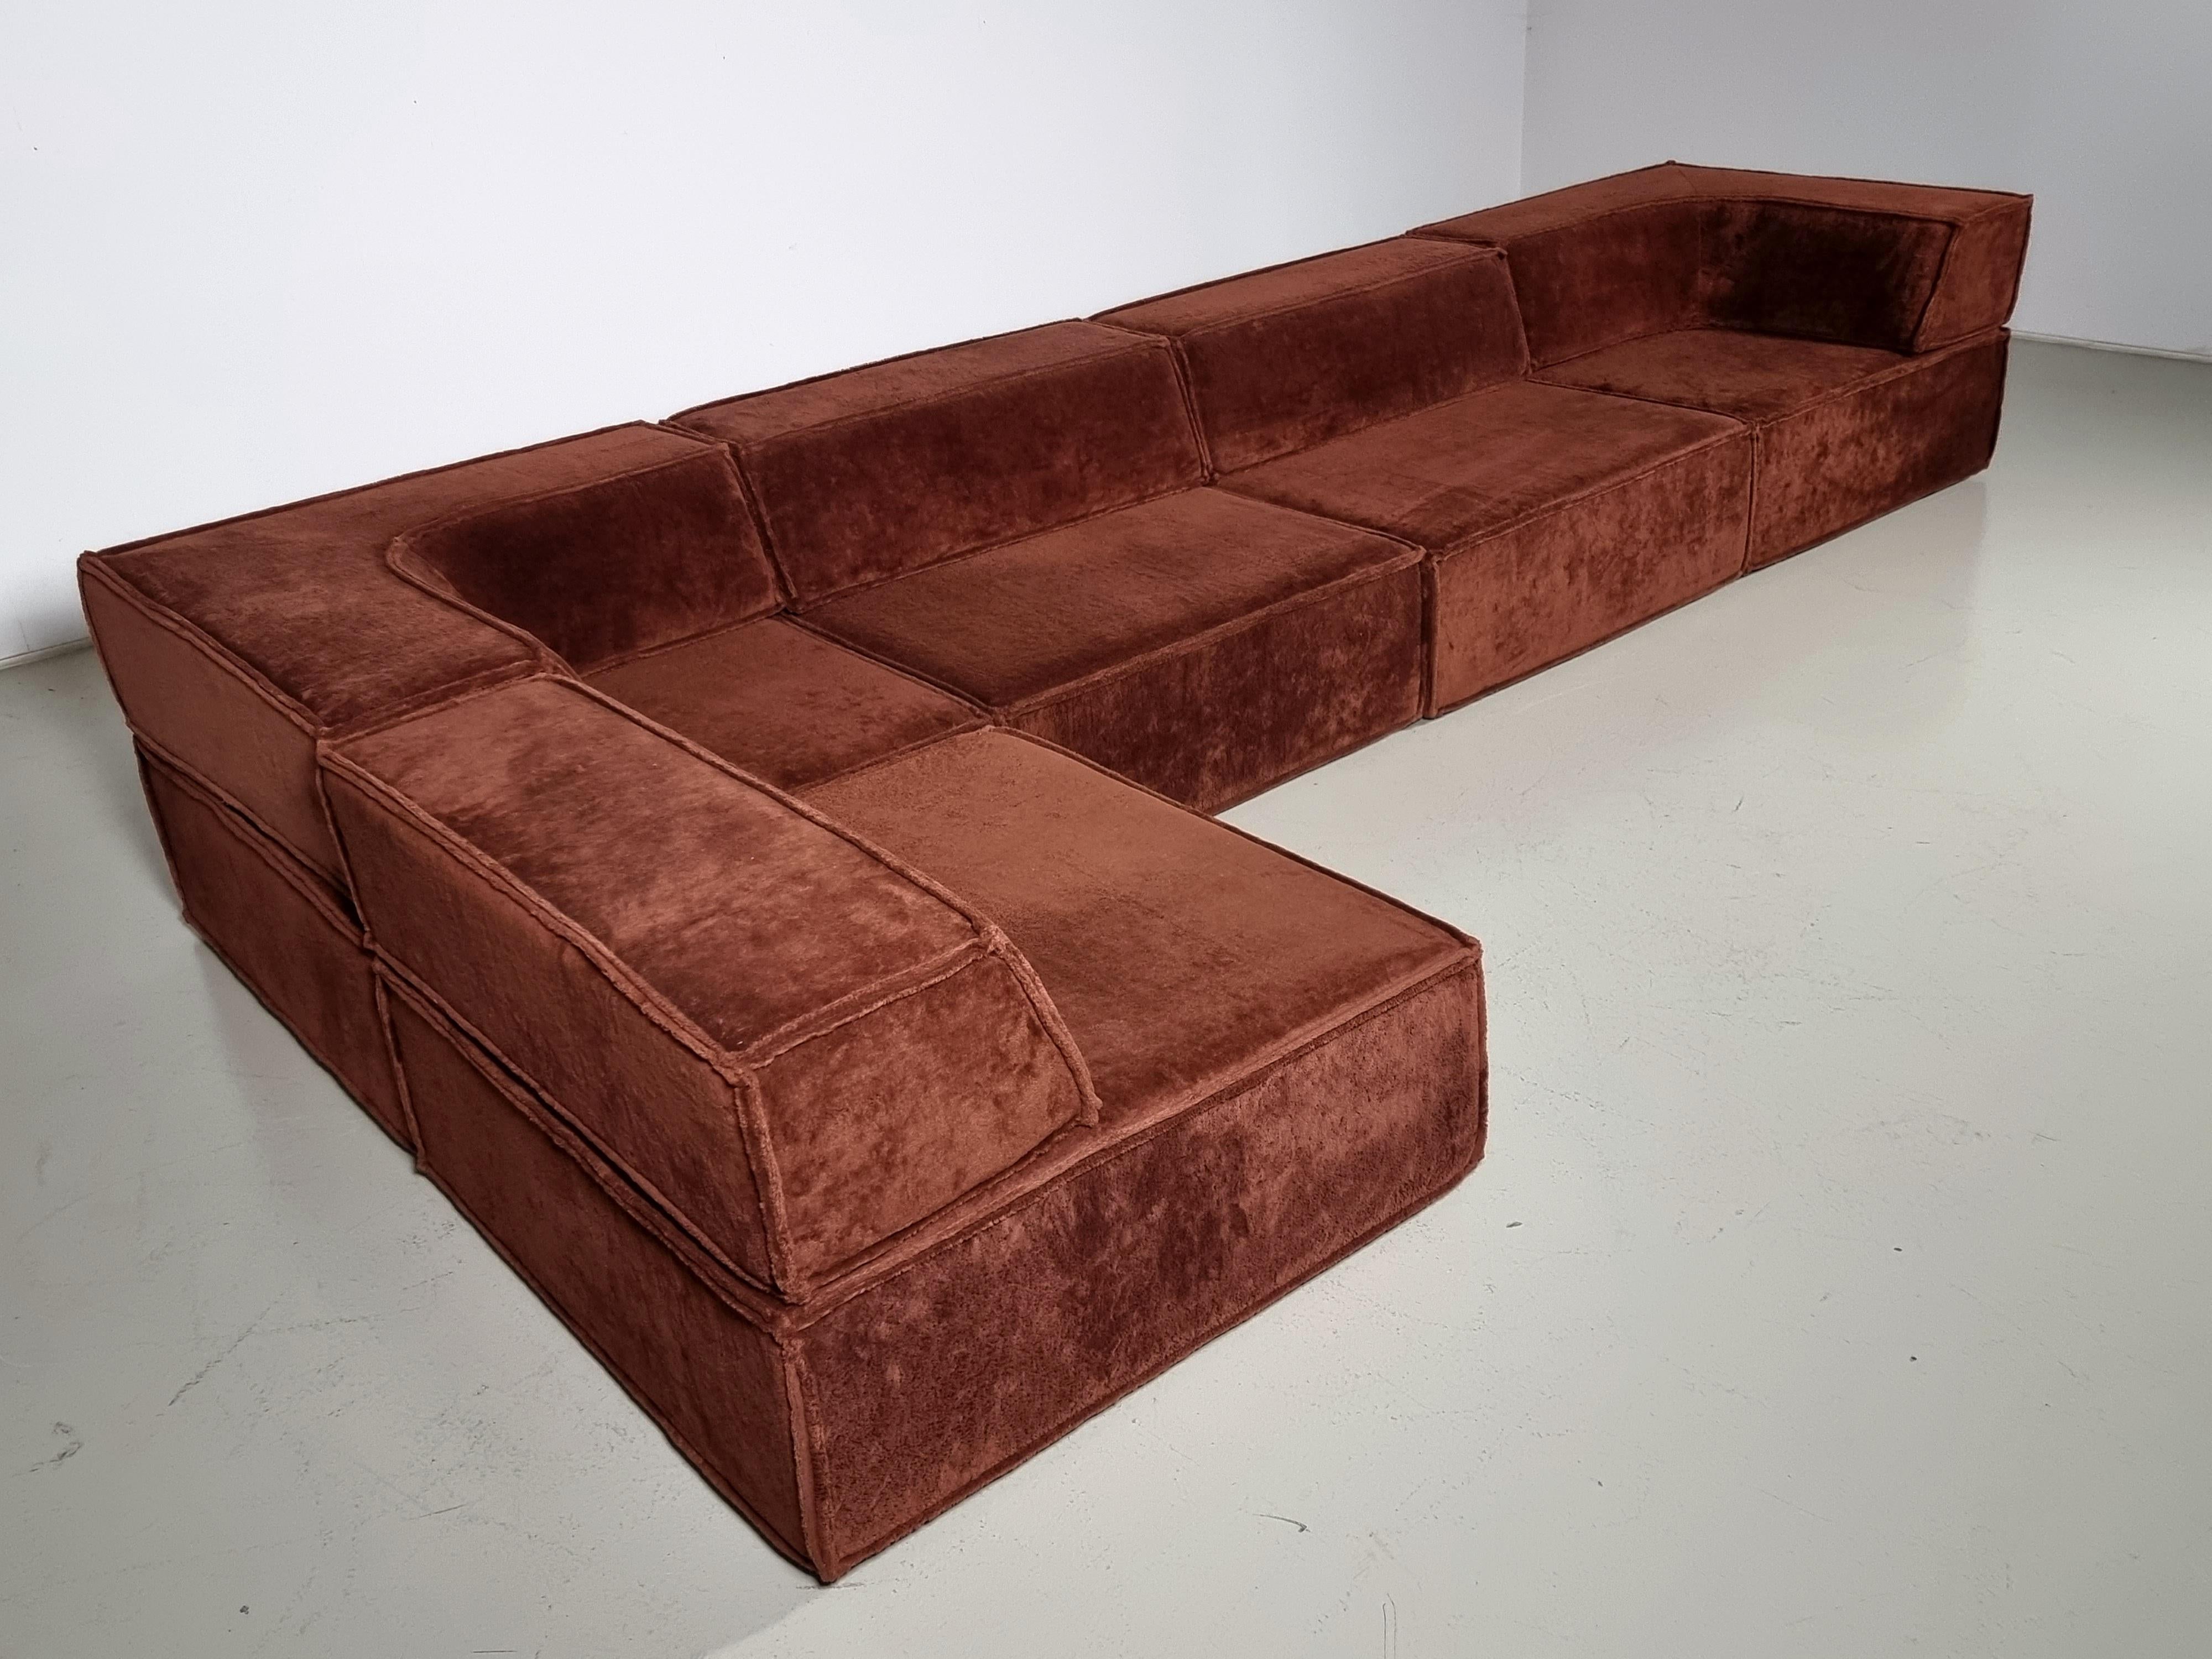 COR Trio Sofa by Team Form Ag in brown original fabric, COR Furniture, Germany 4